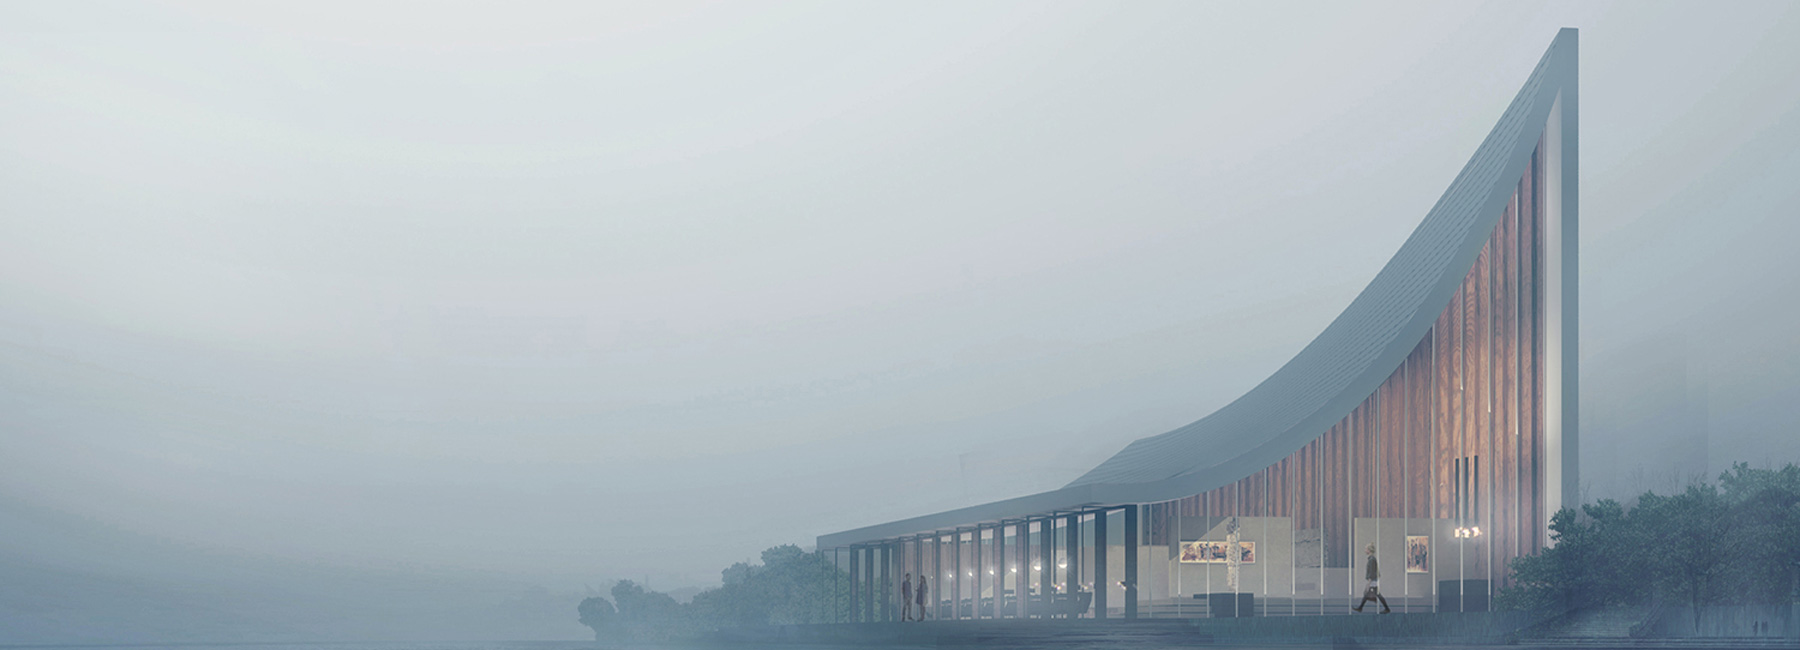 the most beautiful bookstore in chengdu by MUDA-architects sits by the xinglong lake